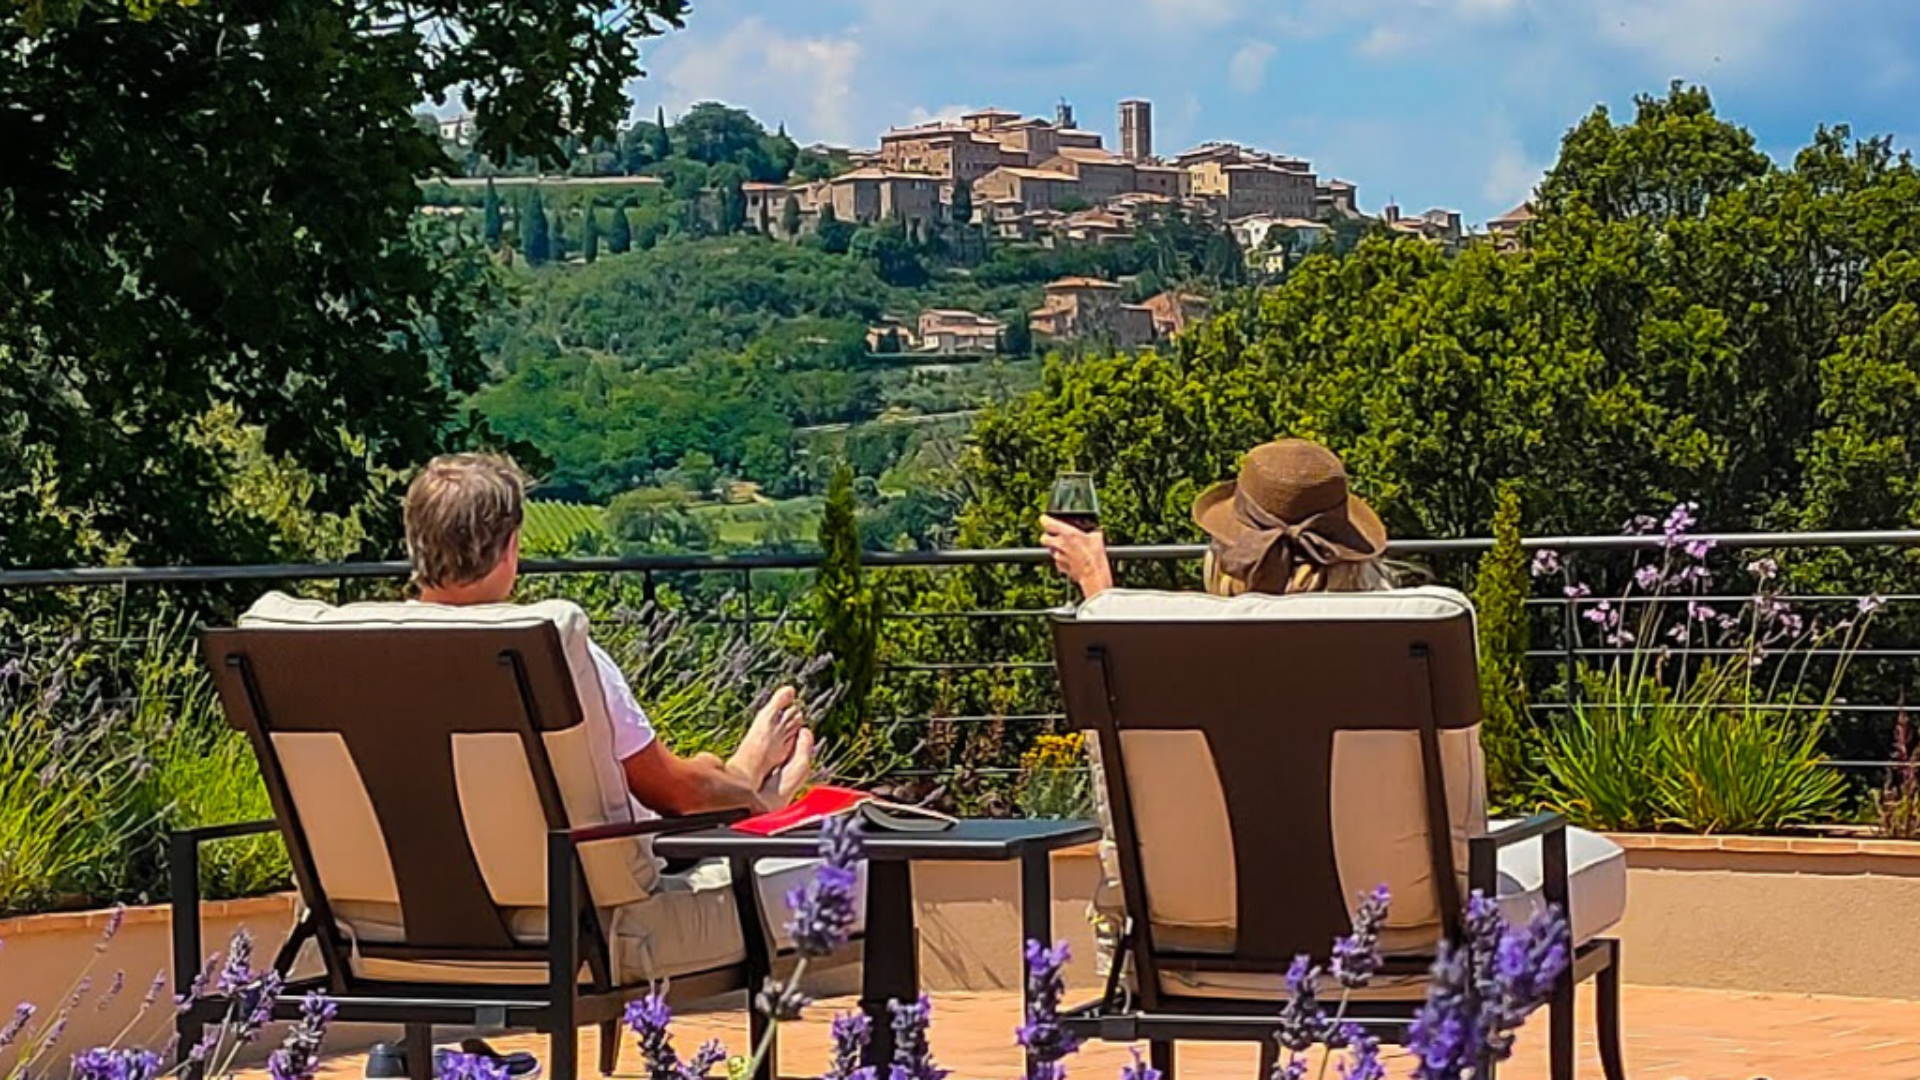 Our guests can have a relaxing stay at Fonte Martino enjoying a wonderful view of Montepulciano and the Tuscan hills